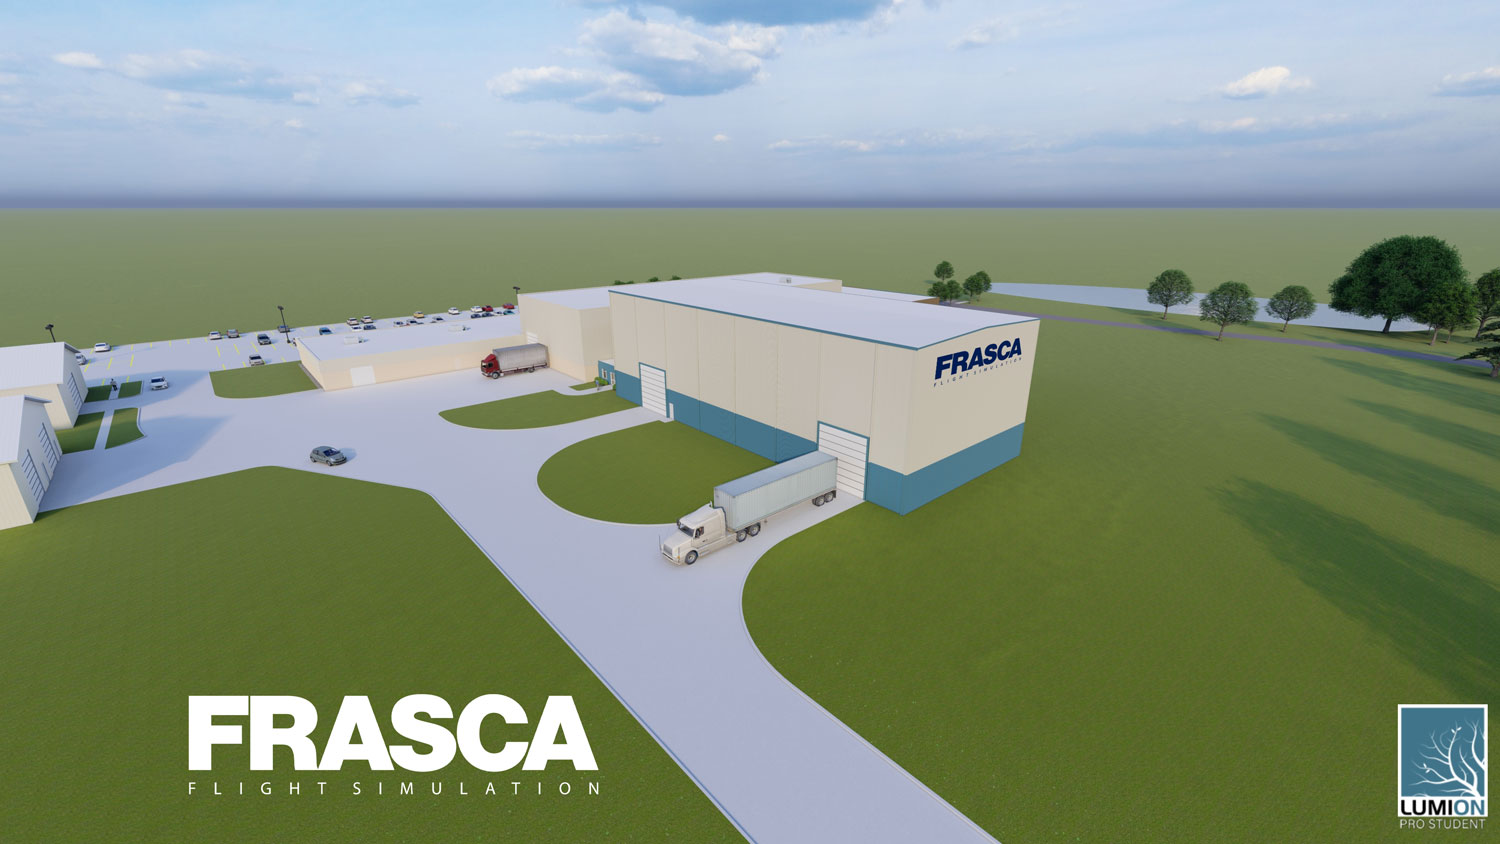 FRASCA Expands Manufacturing Capacity with Level D FFS Contract Win